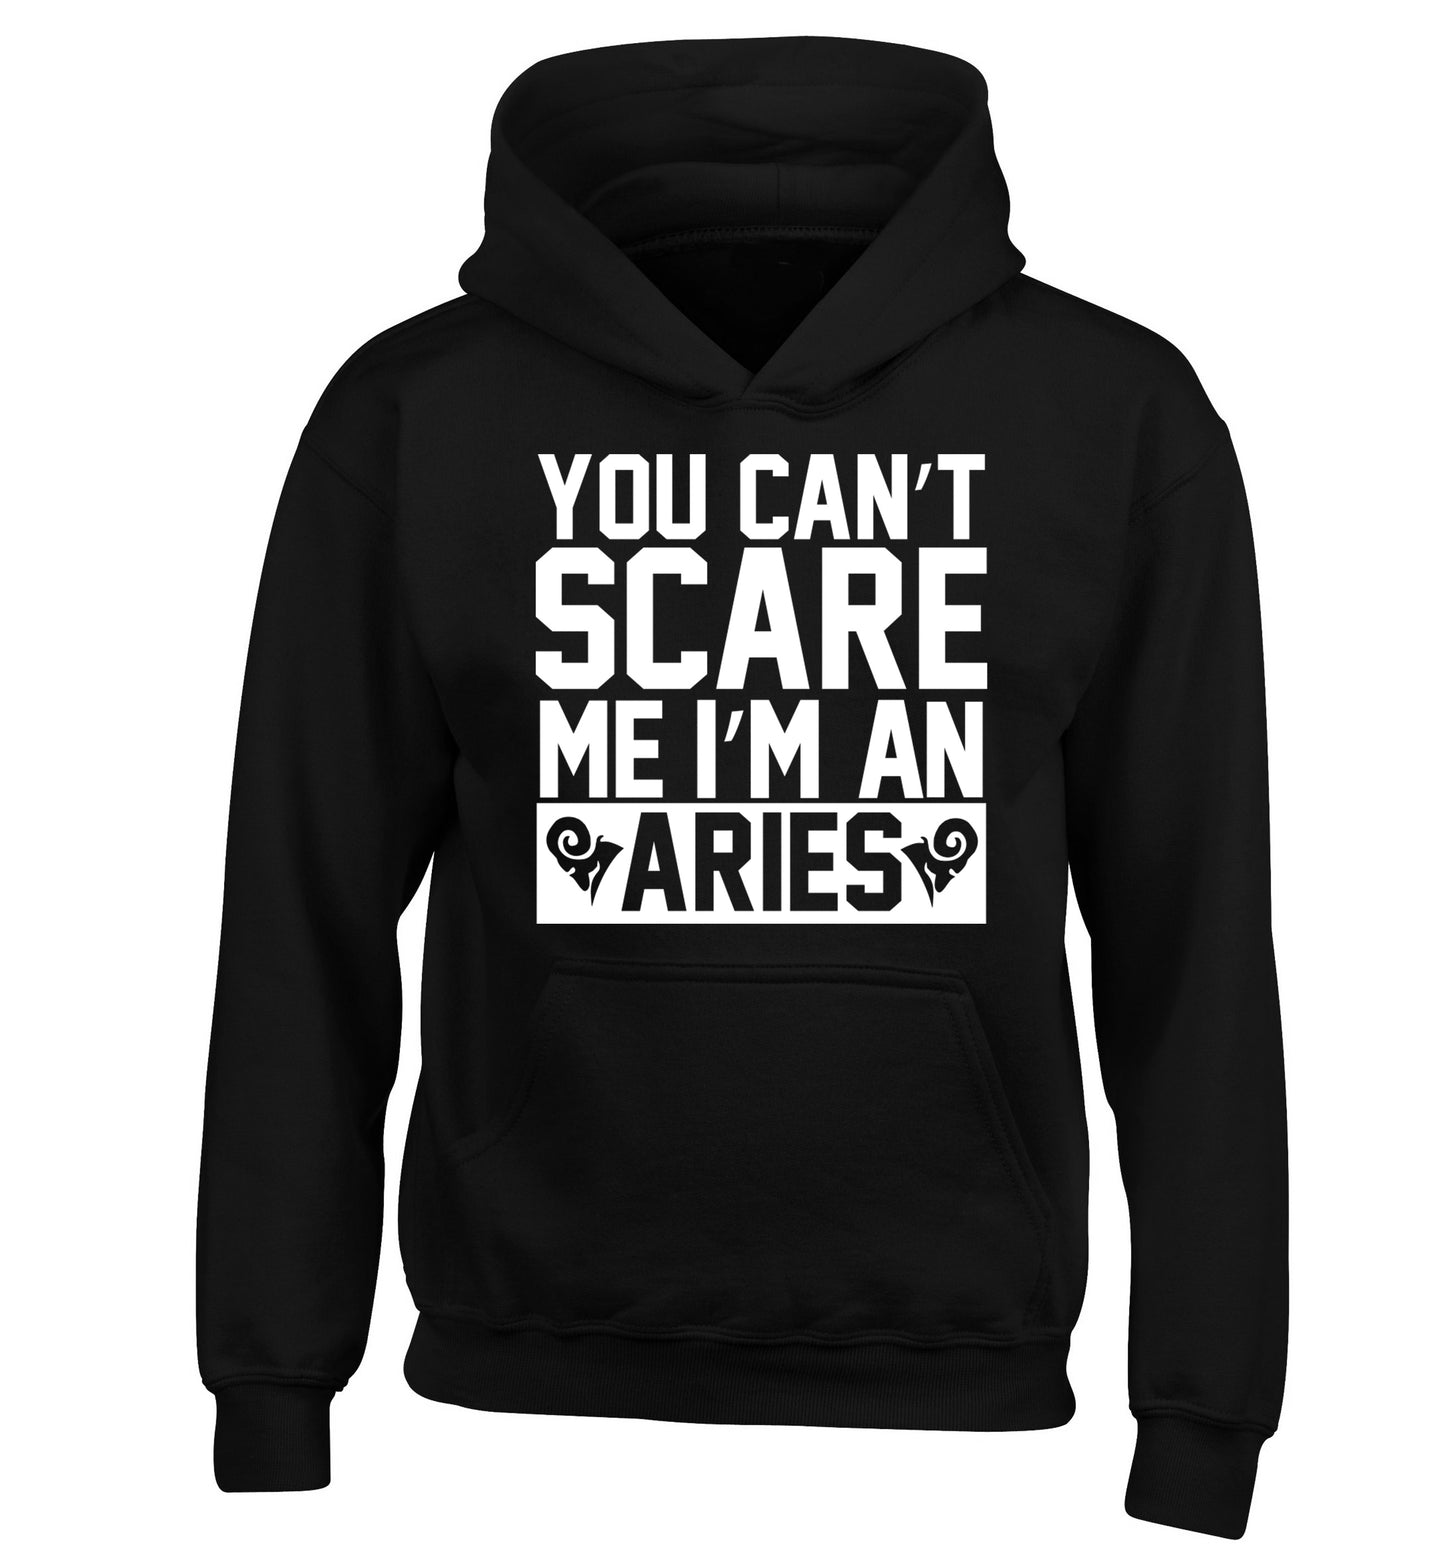 You can't scare me I'm an aries children's black hoodie 12-13 Years